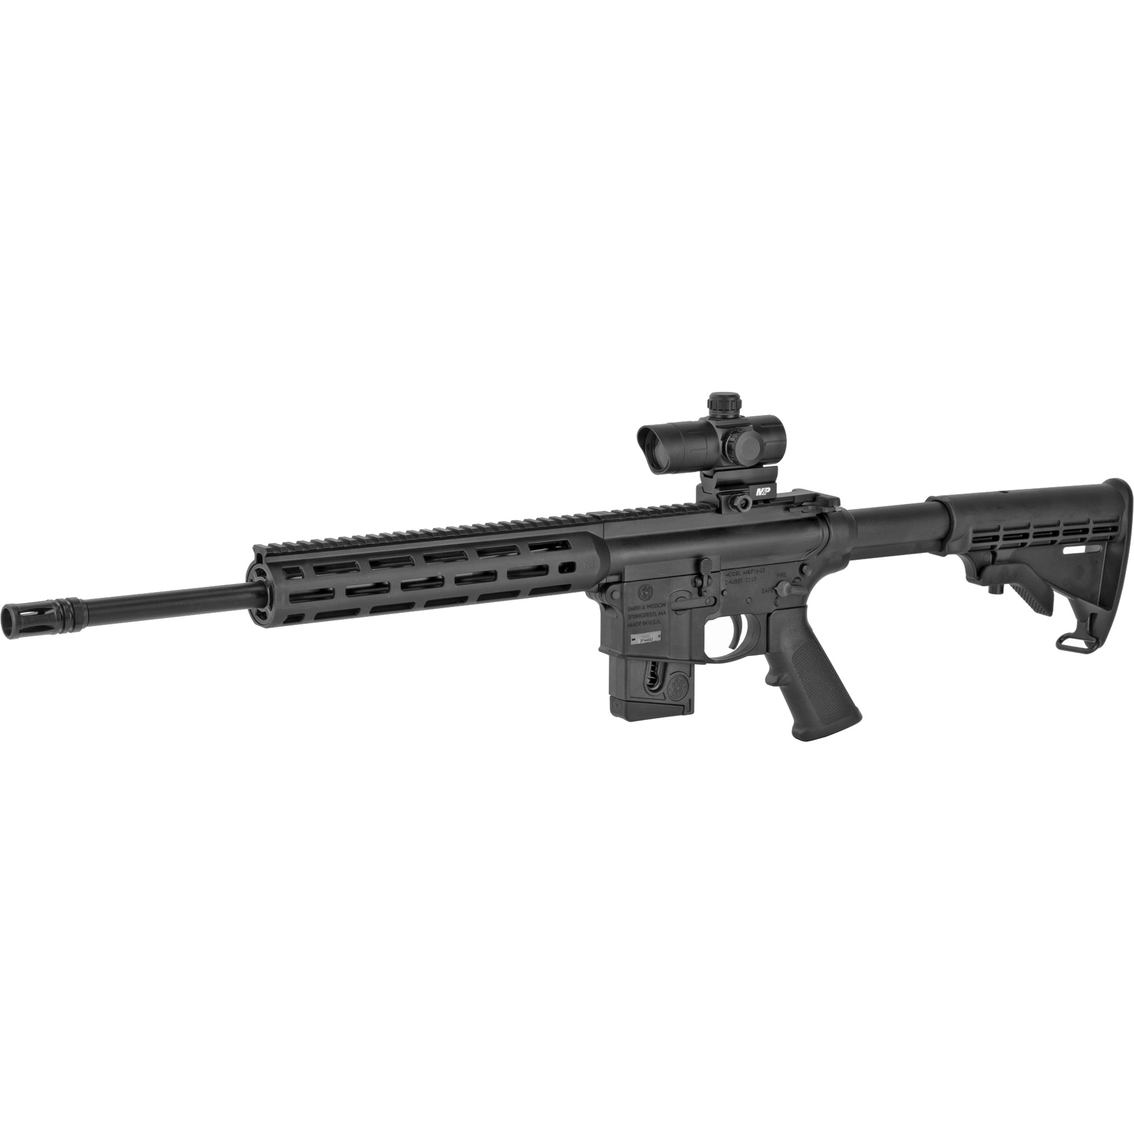 Smith & Wesson M&P15-22 Sport LR 16.5 in. Barrel with Red Dot Sight 10 Rds Rifle - Image 3 of 3